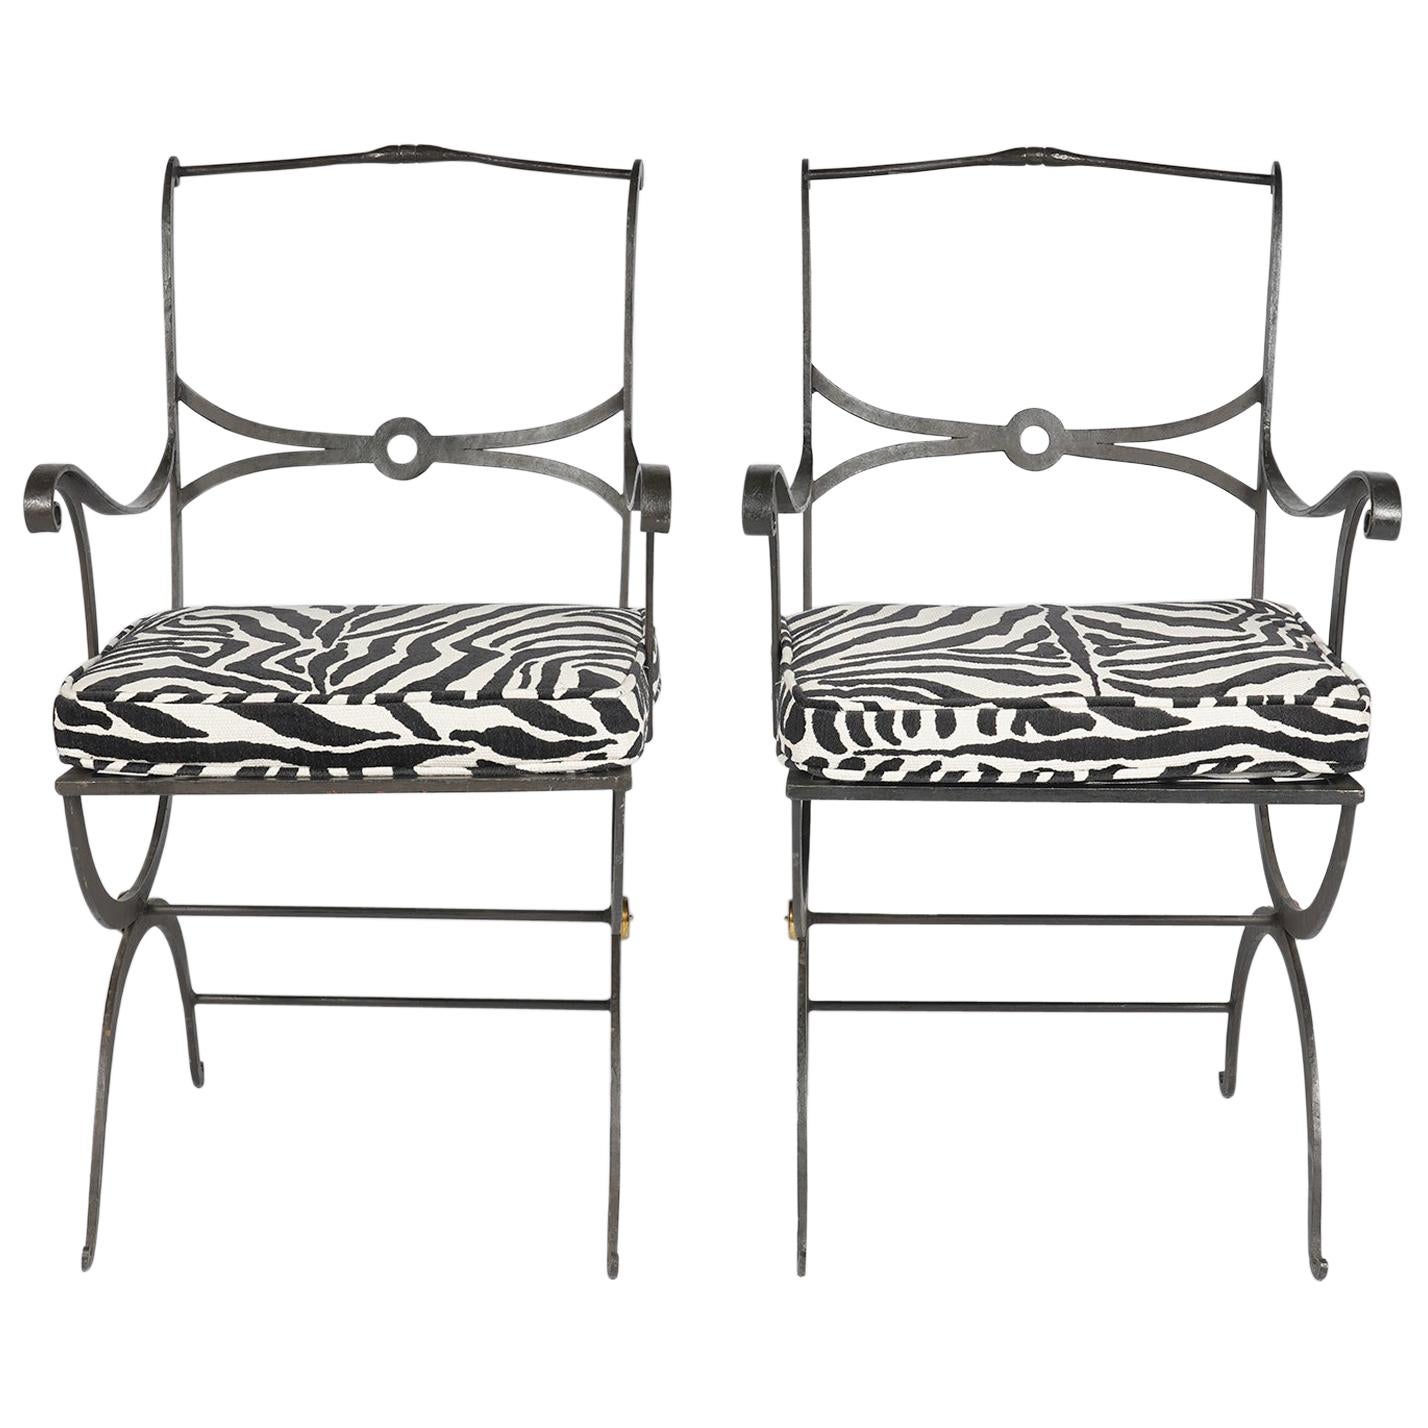 Pair of Regency Style Painted Iron Armchairs and Zebra Pattern Cushions, 20th C